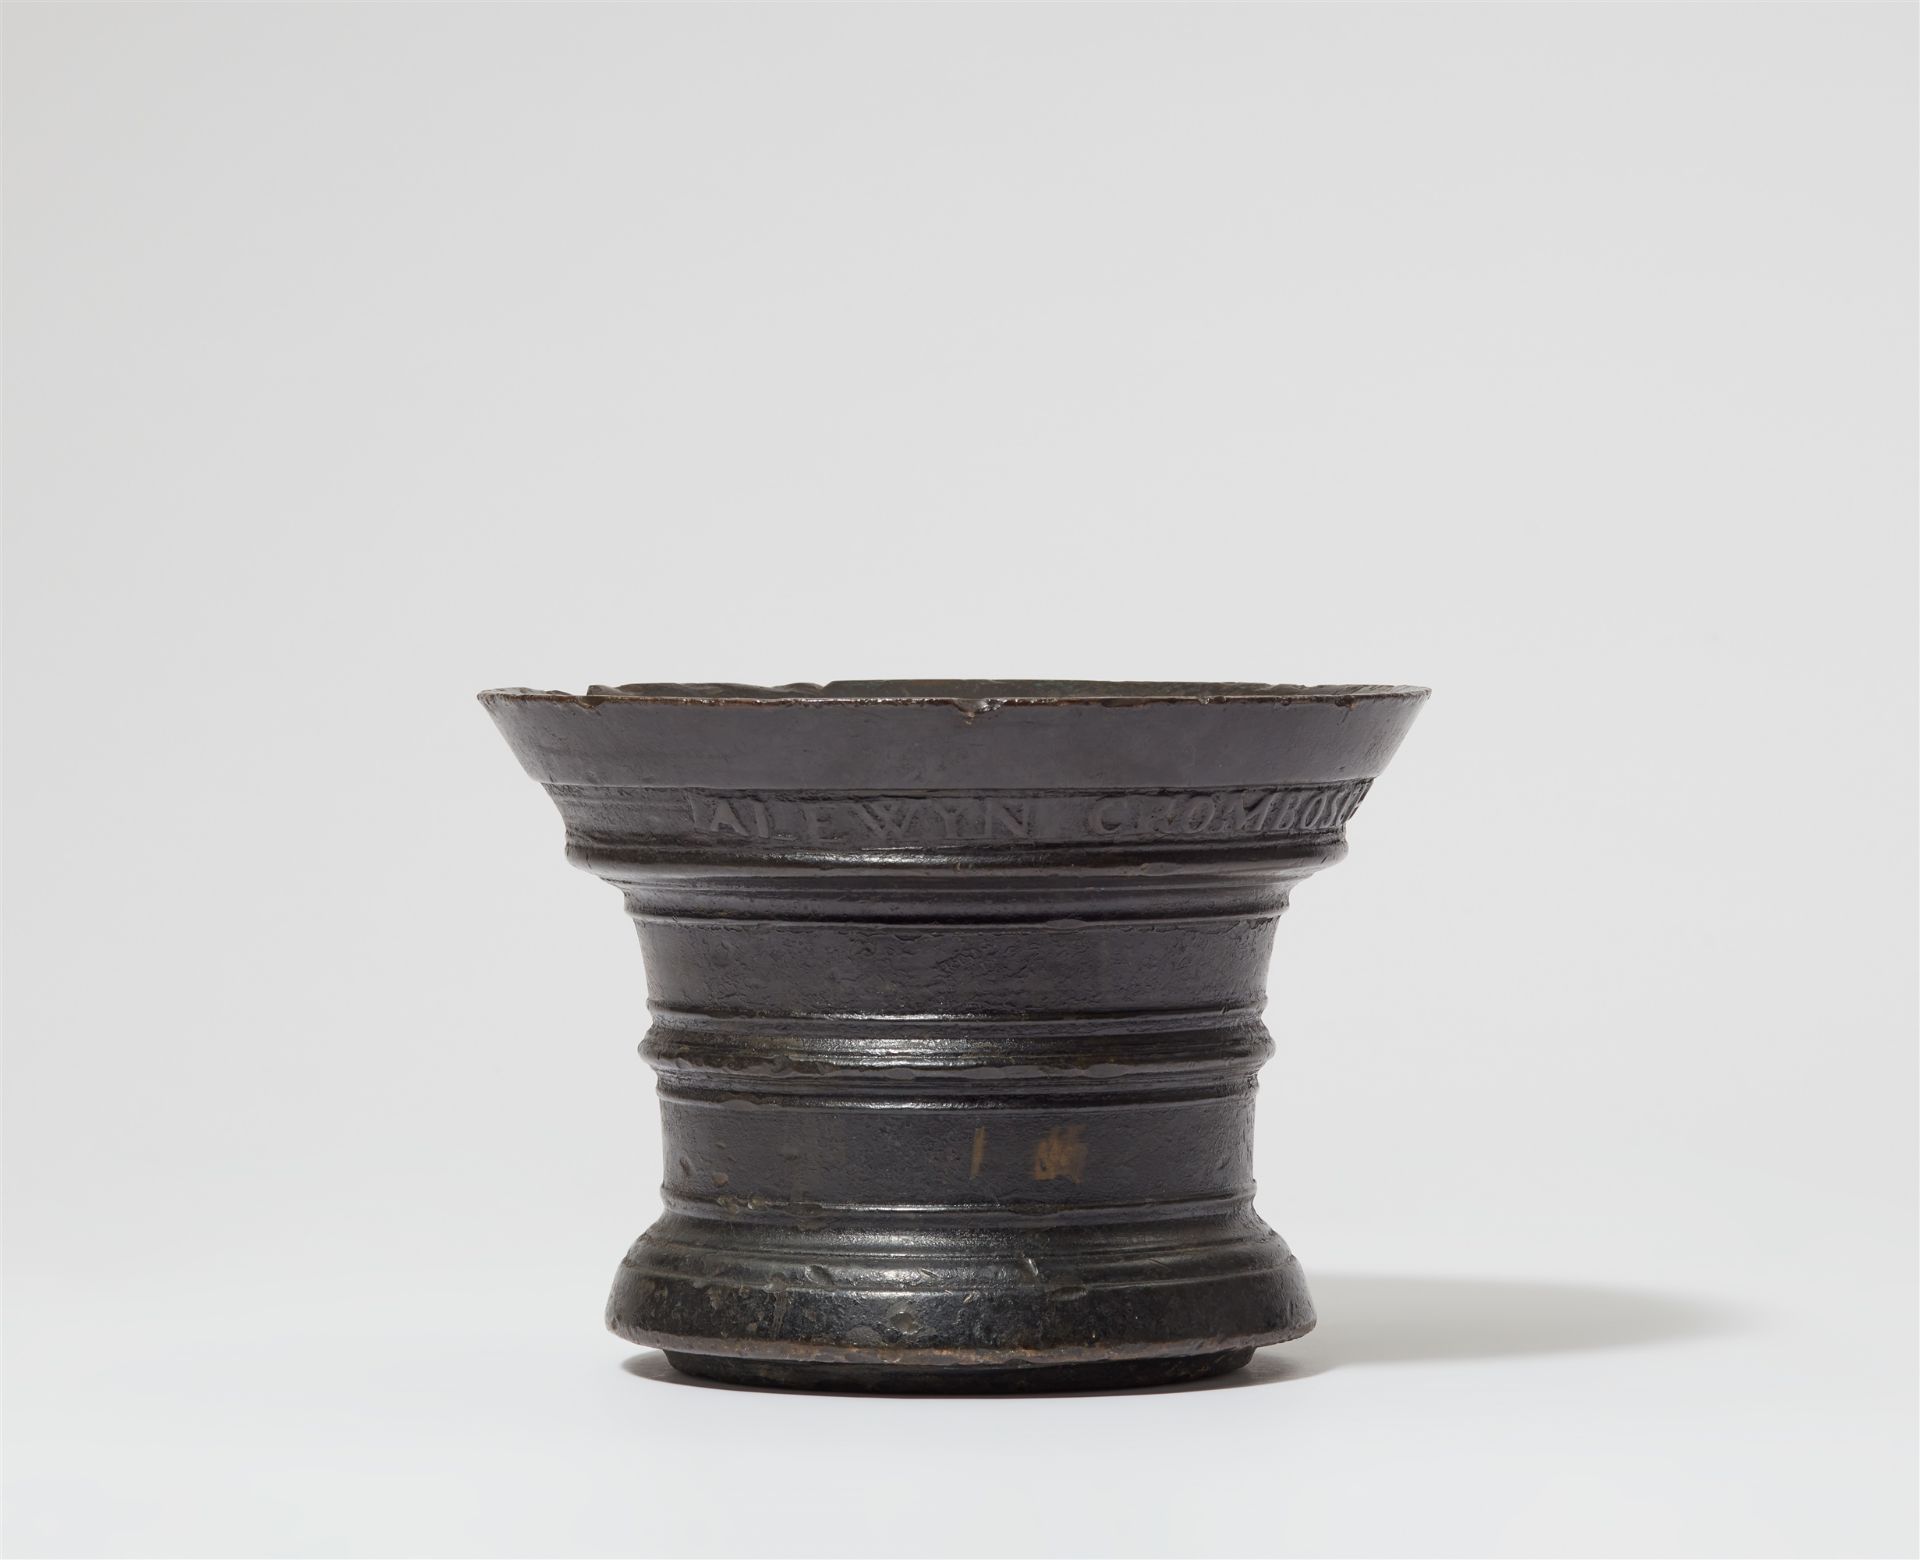 A rare signed and dated Amsterdam bronze mortar